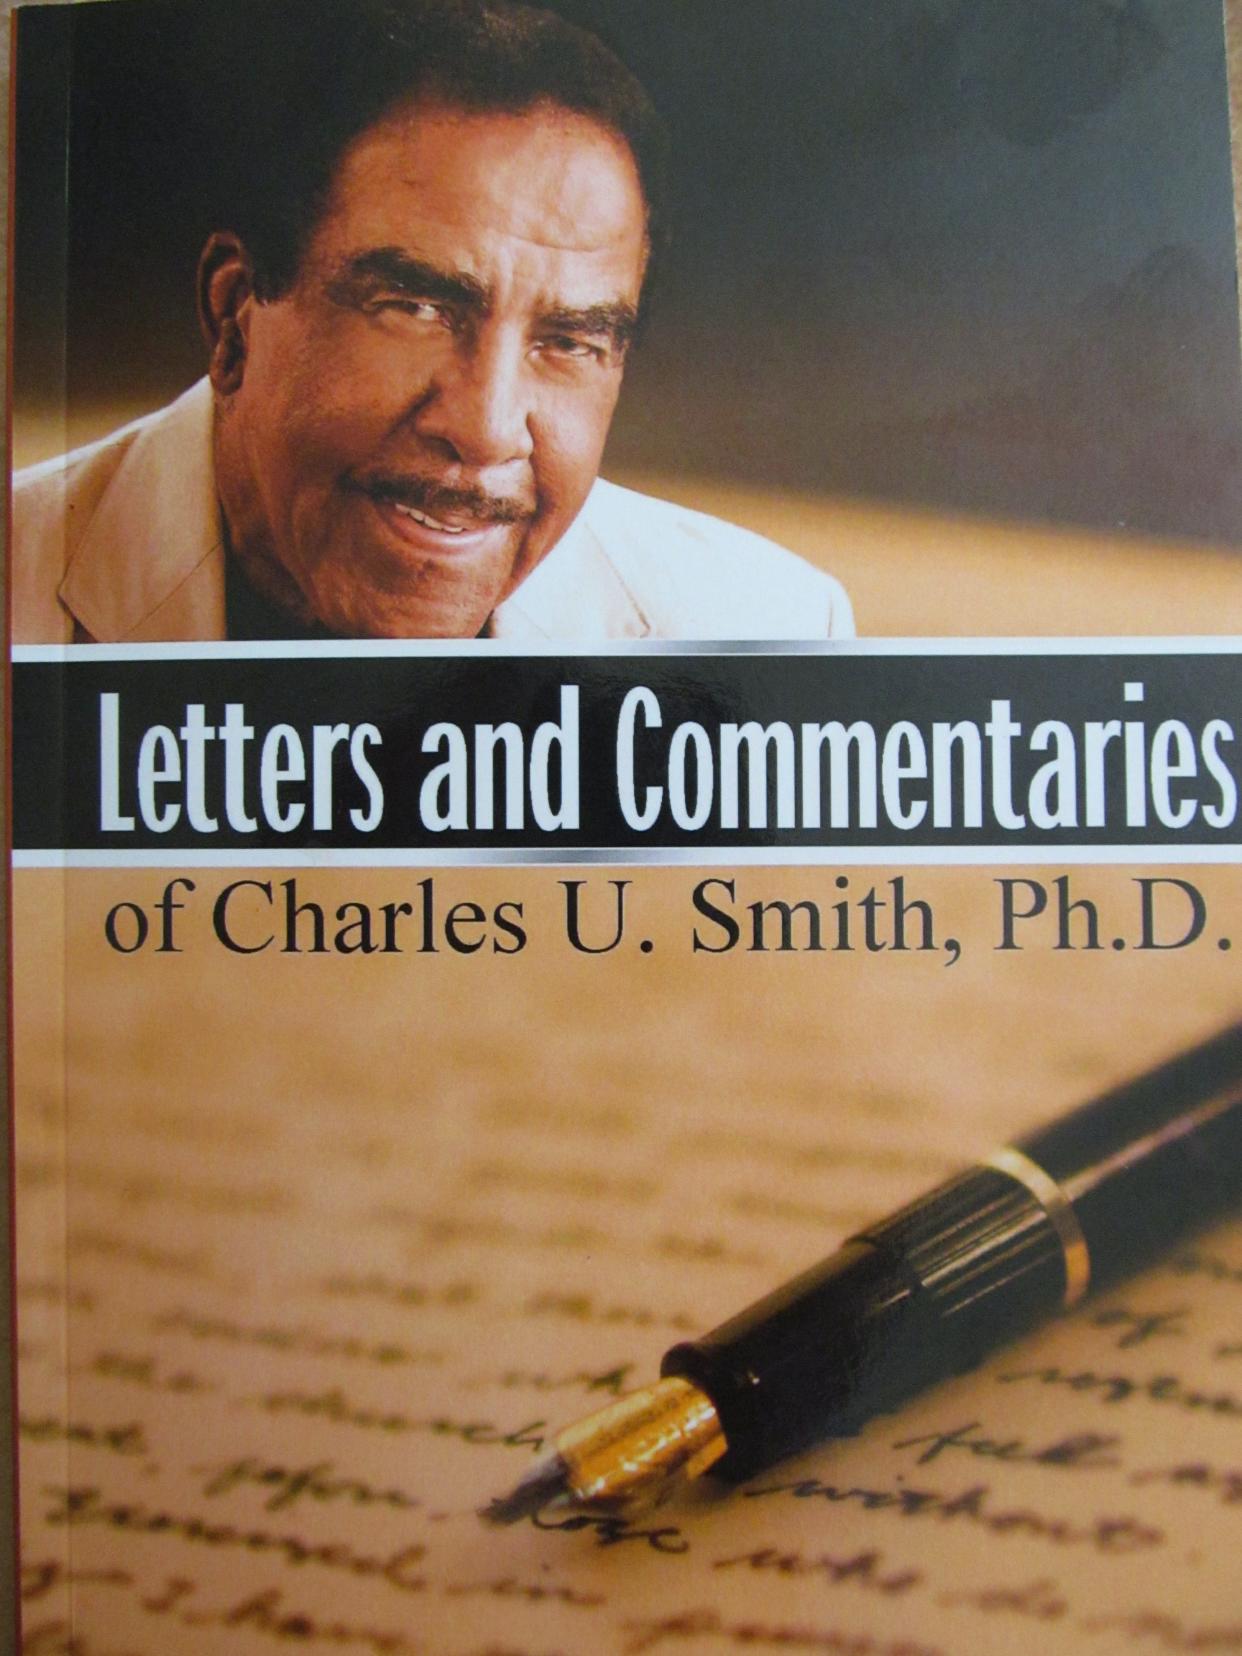 Charles U. Smith on the cover of his 14th and final book, published in 2013.